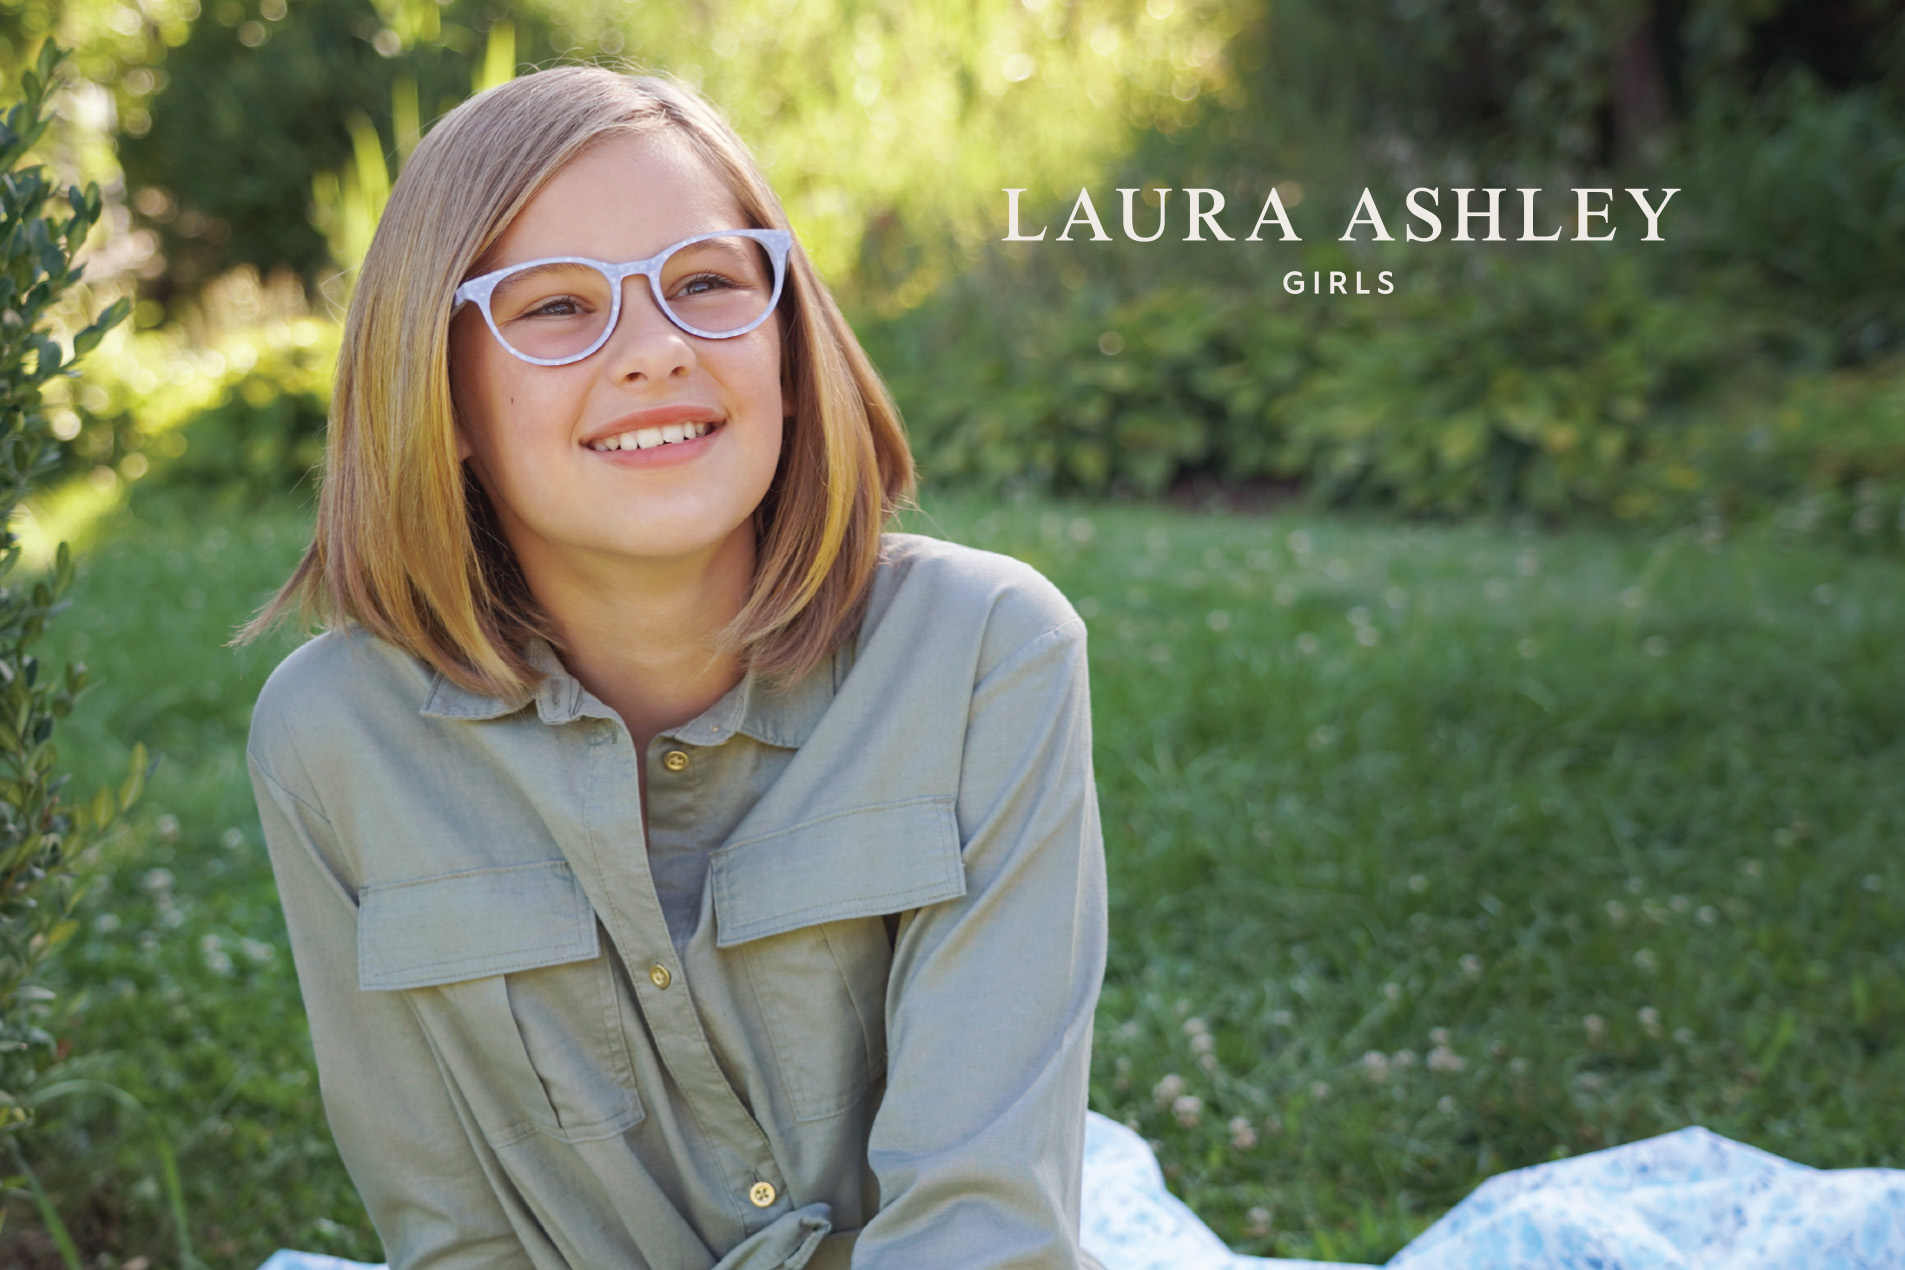 Laura Ashley Girls collection home banner.